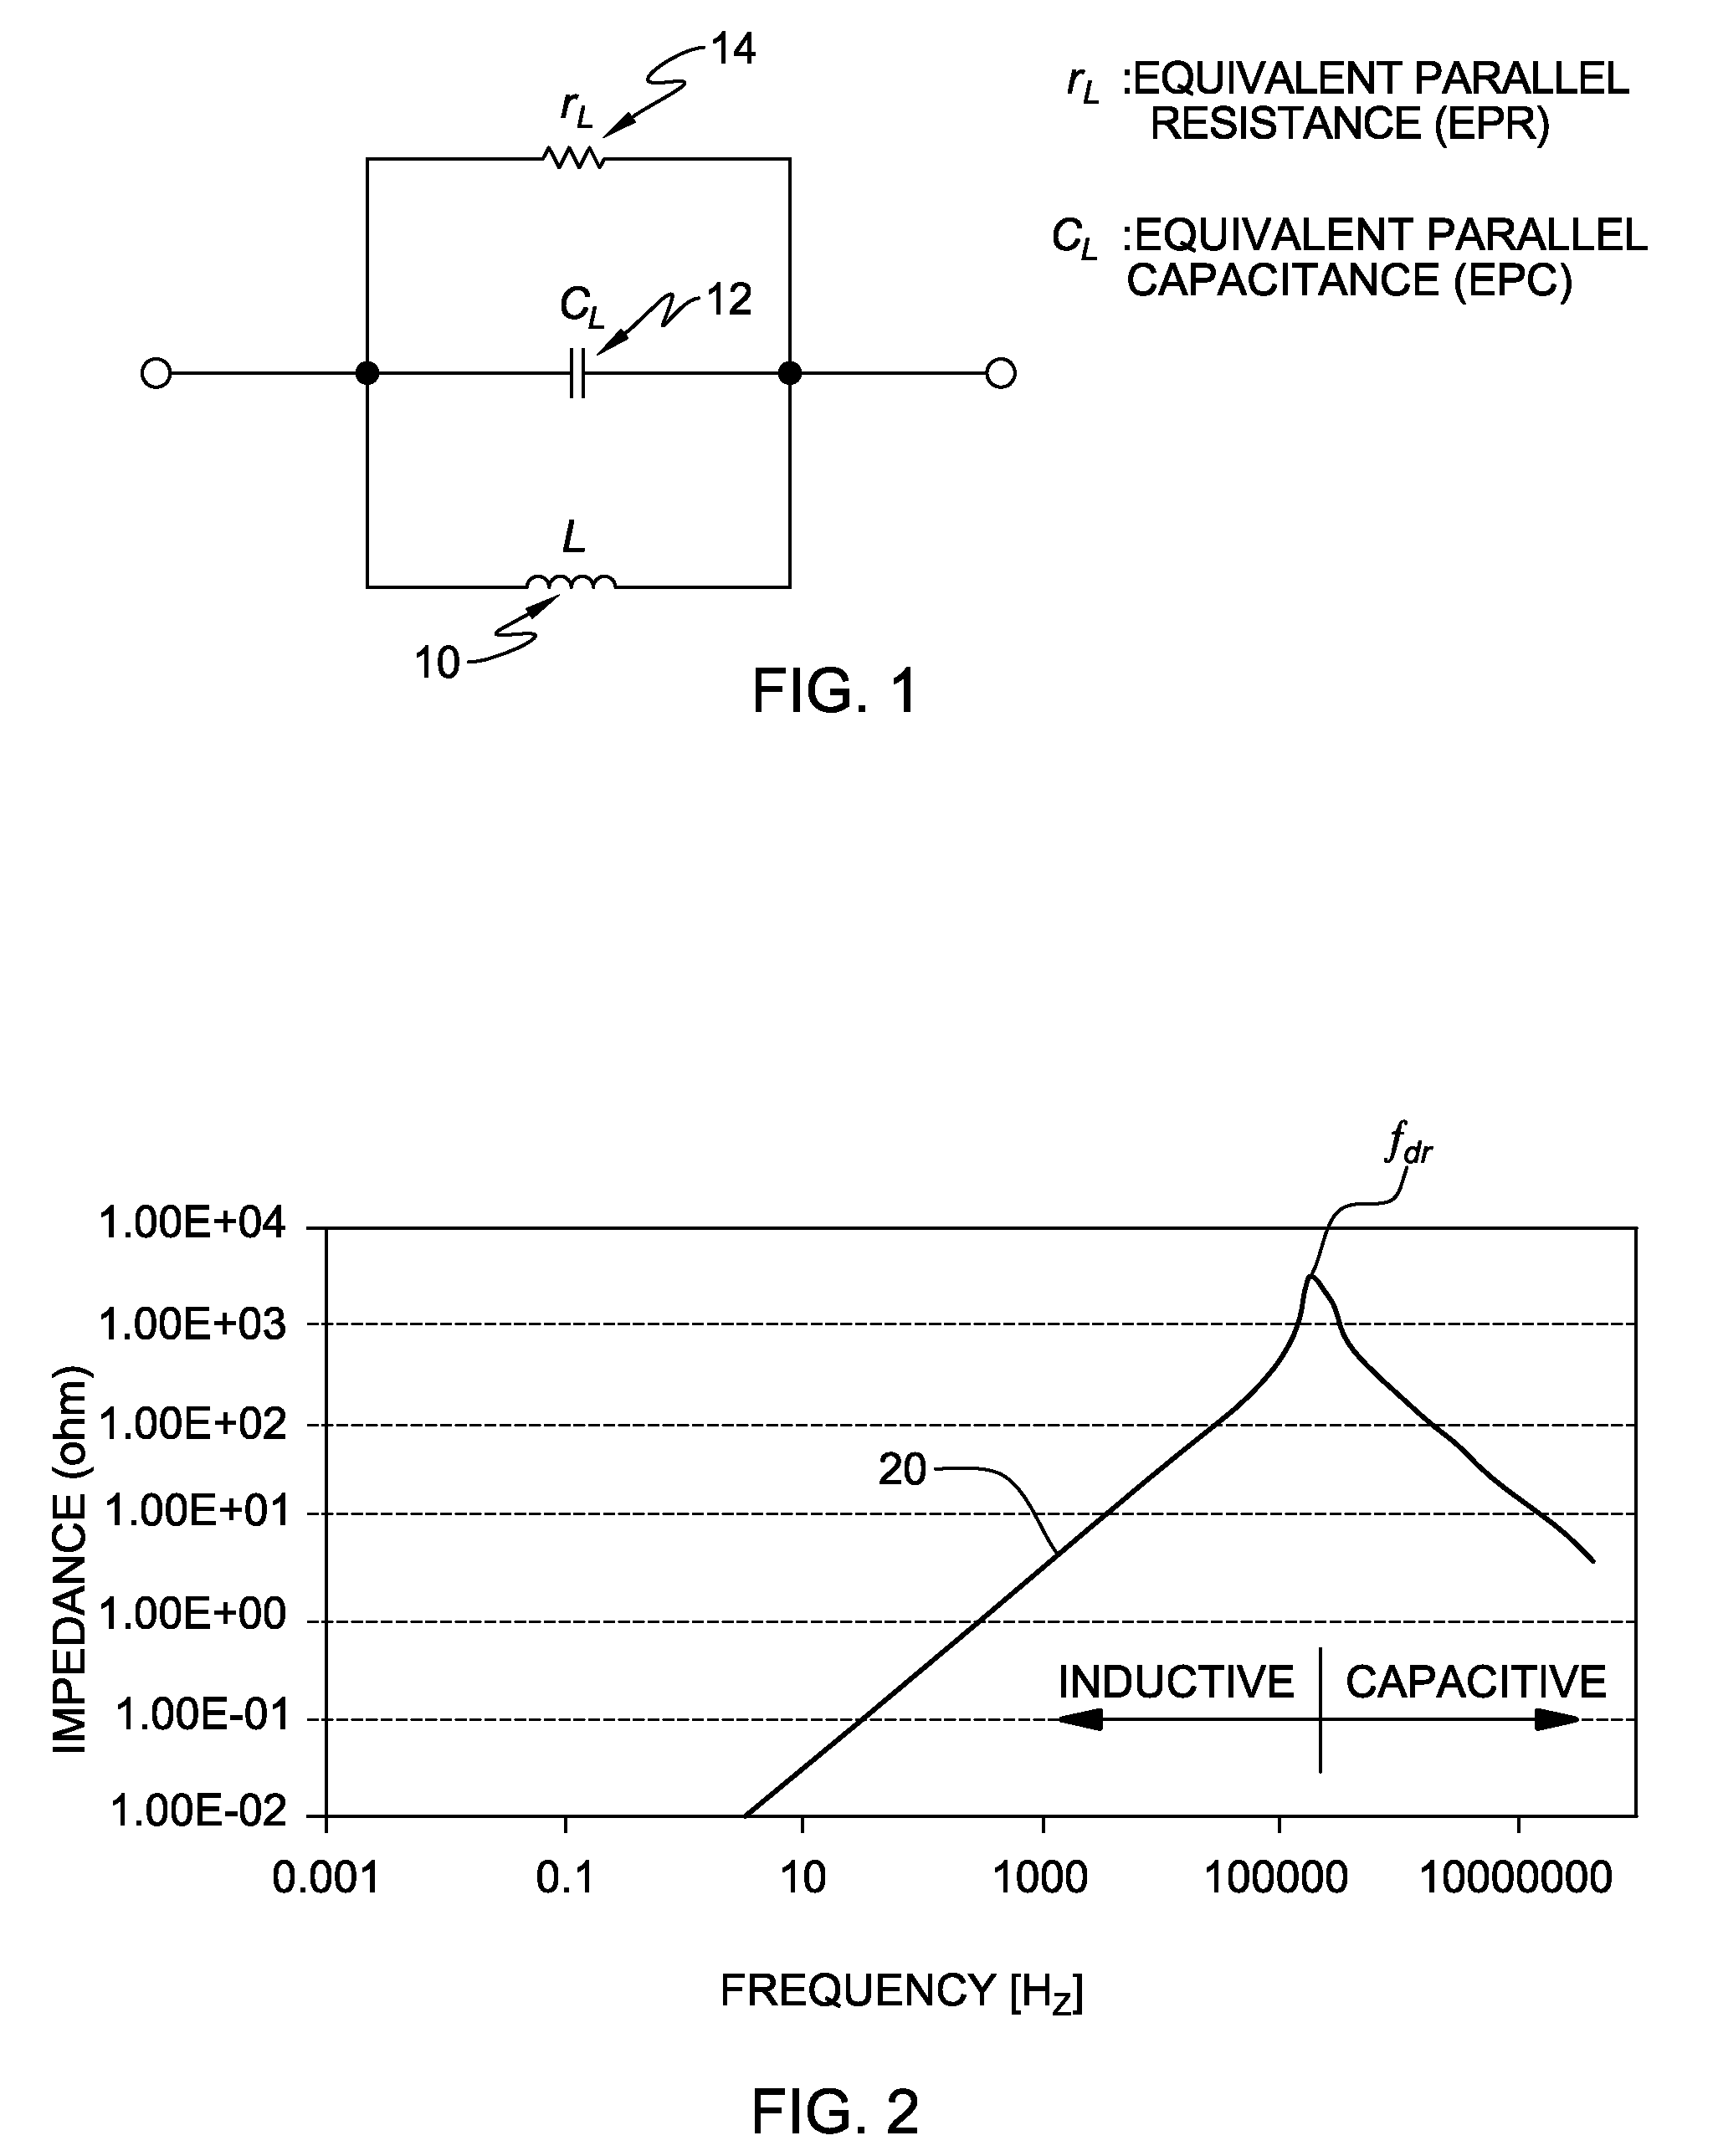 Method and apparatus for suppressing noise caused by parasitic capacitance and/or resistance in an electronic circuit or system